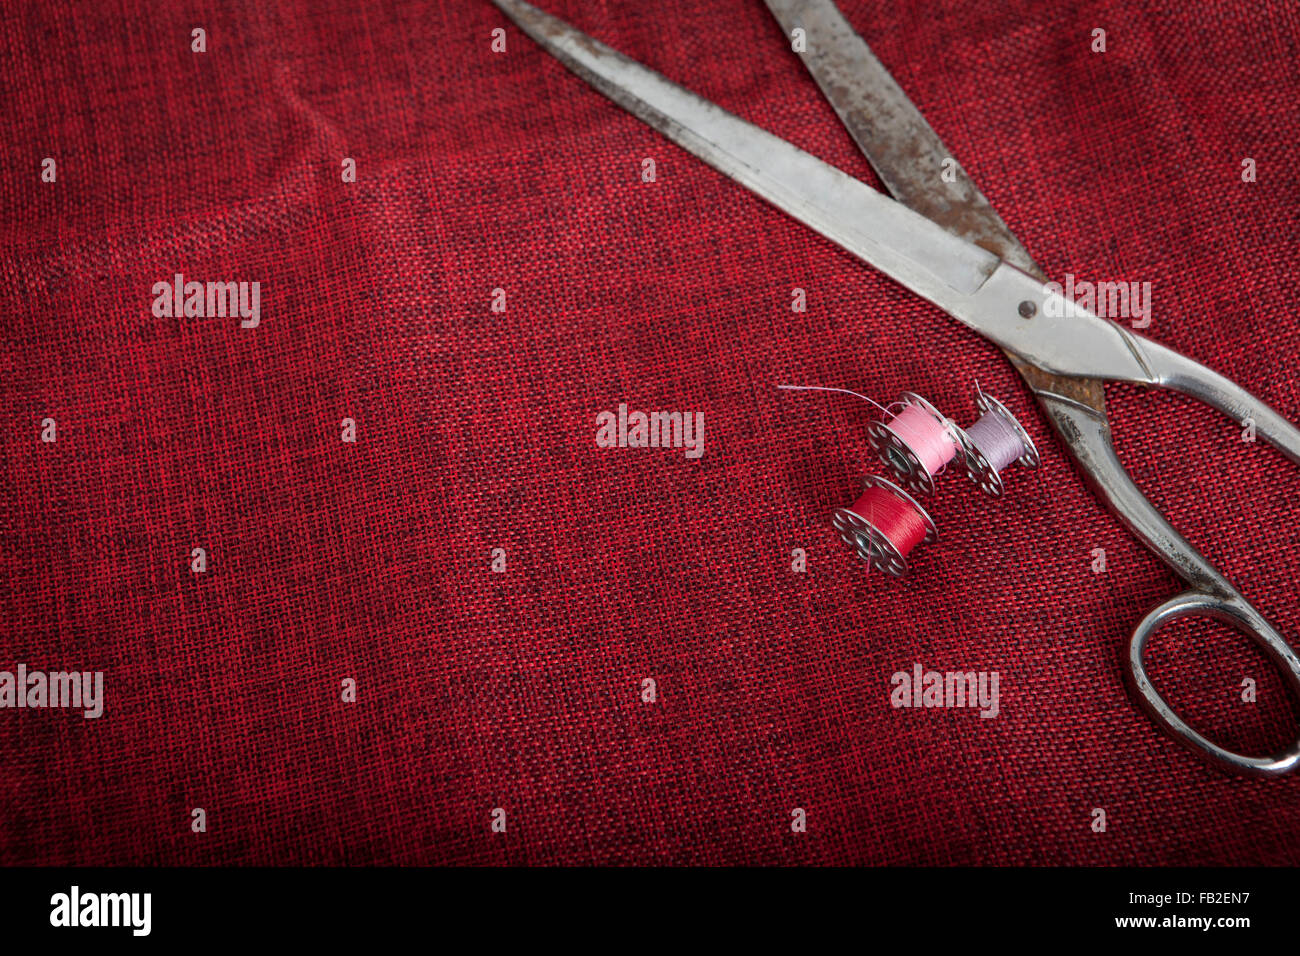 to sew a red cloth with scissors and thread Stock Photo